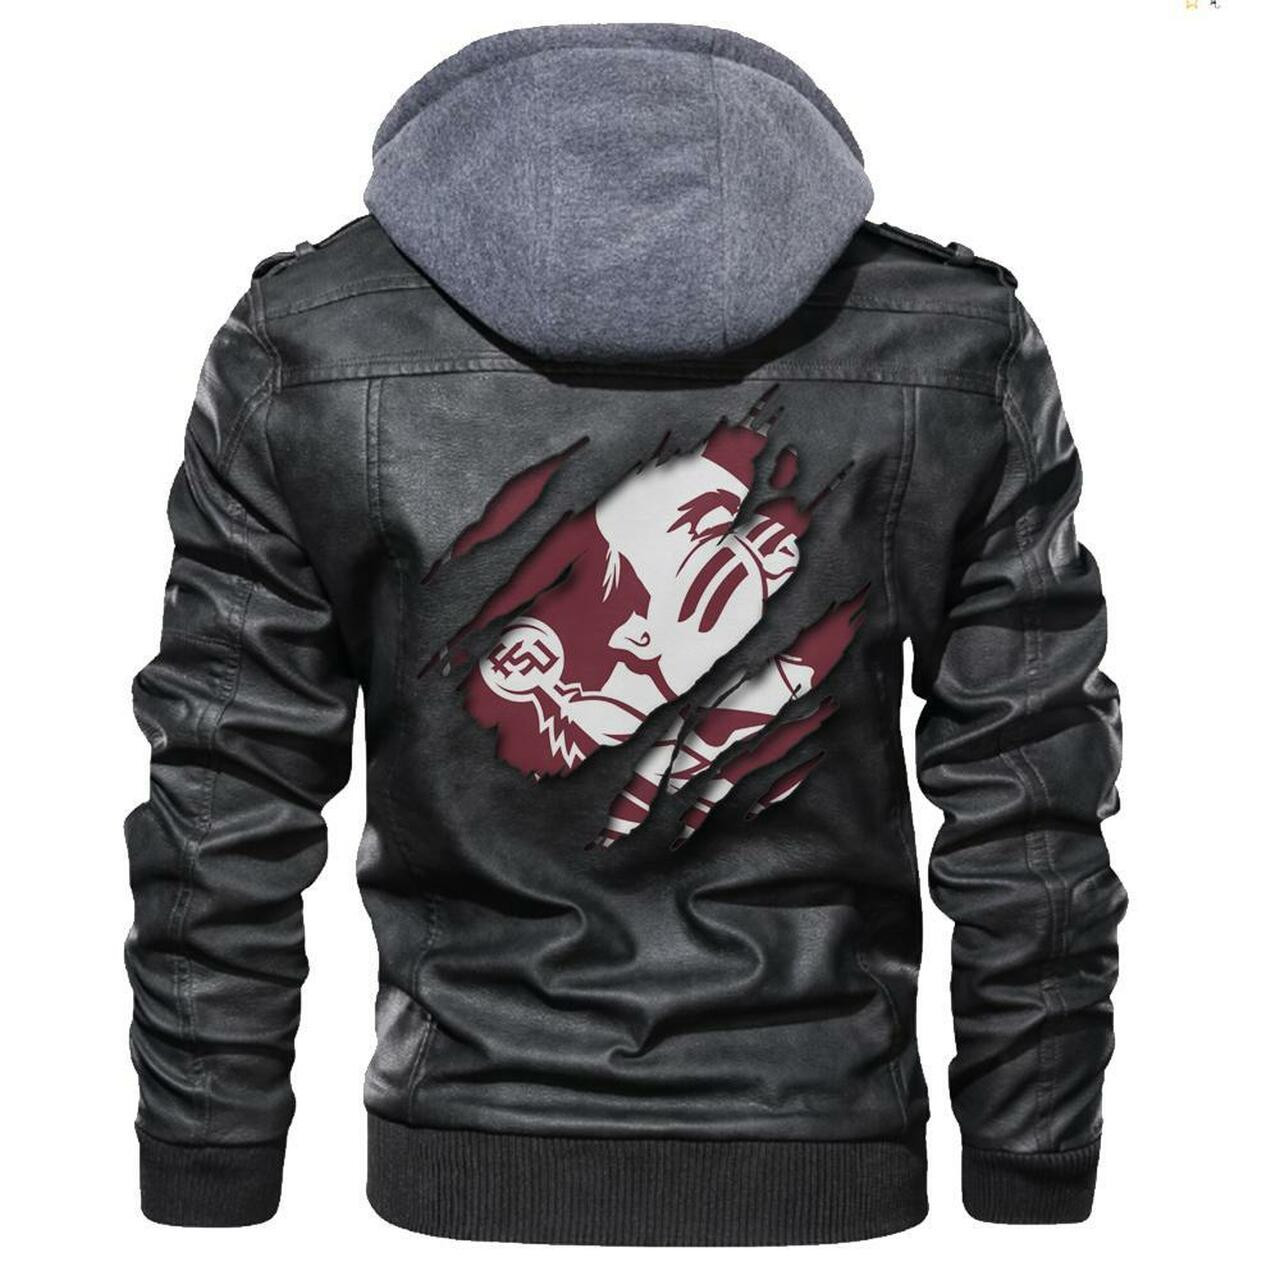 This leather Jacket will look great on you and make you stand out from the crowd 13